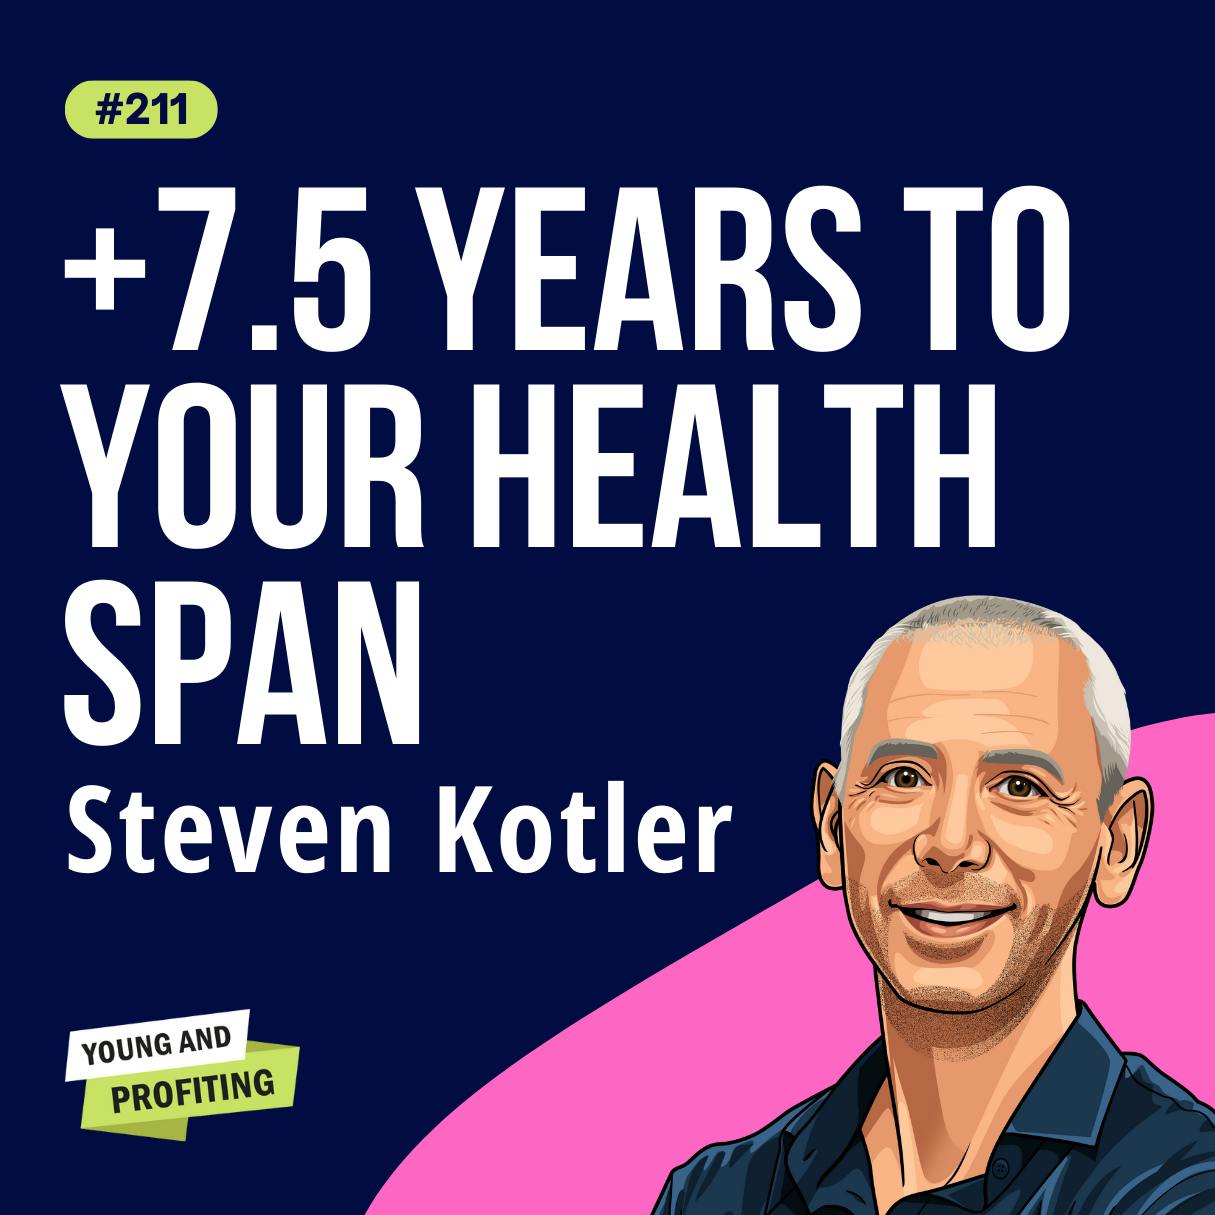 Steven Kotler: Peak Performance Aging, How to Stay at the Top of Your Game in Your 30s, 40s, 50s, and Beyond | E211